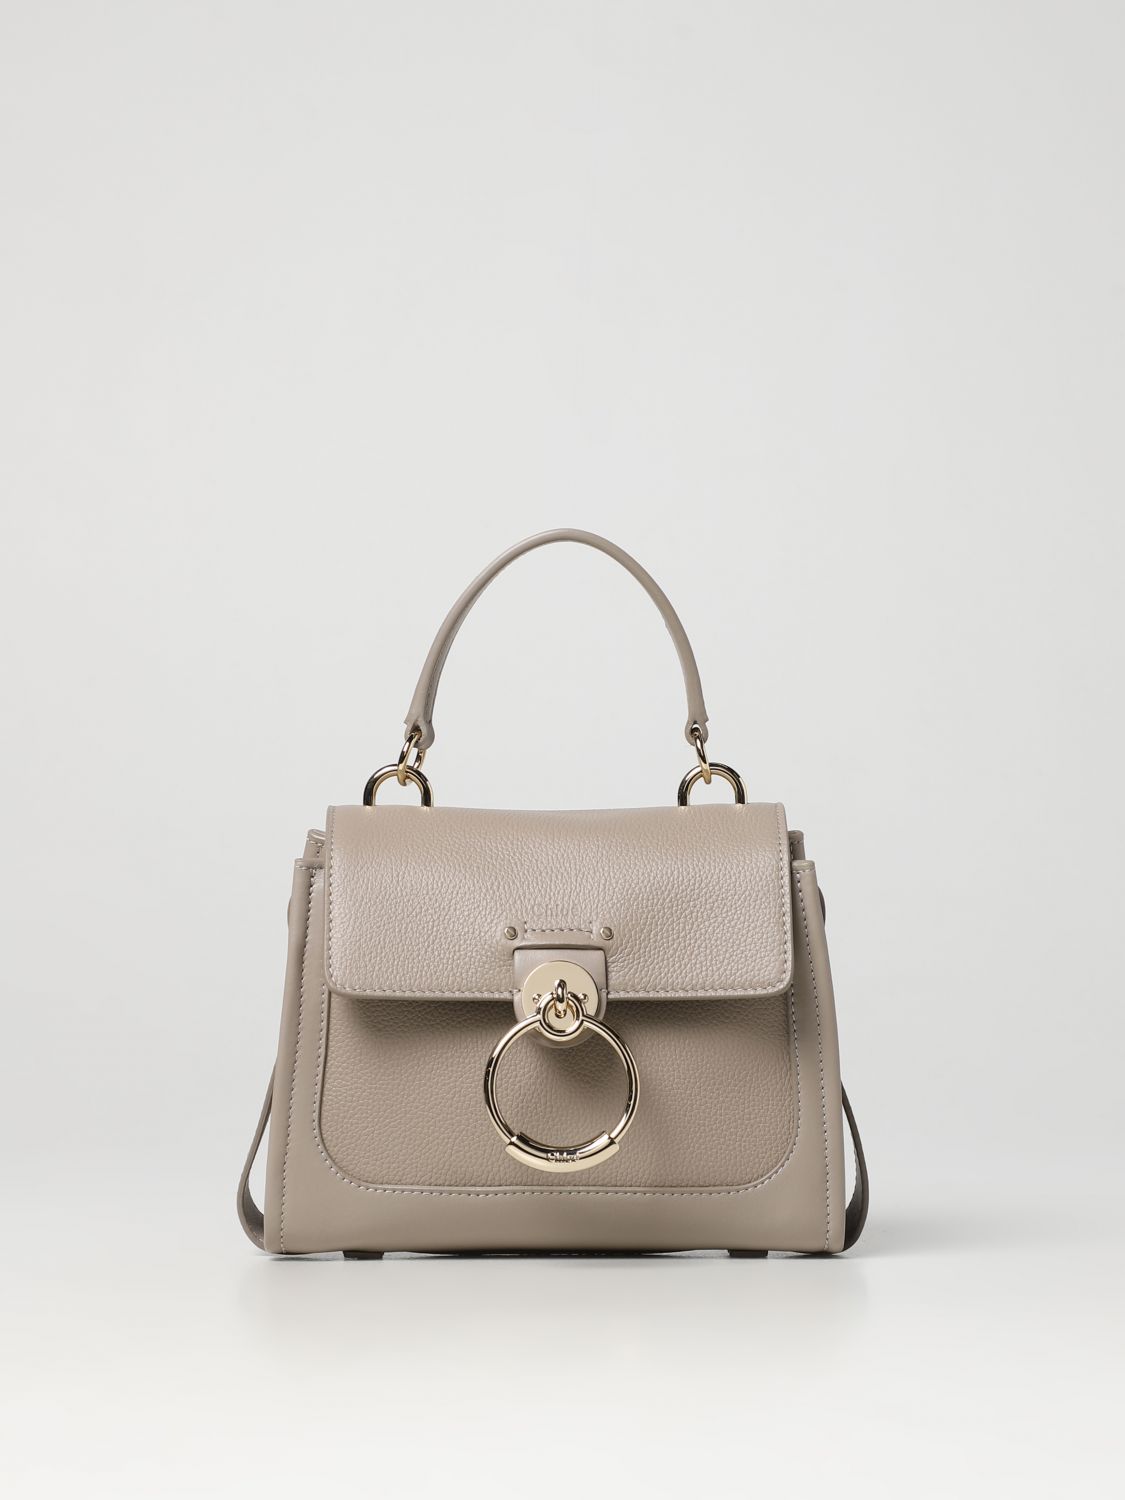 Chloé: Tess Bag In Smooth And Grained Leather - Grey | Chloé Handbag  C22Ss143G33 Online On Giglio.Com